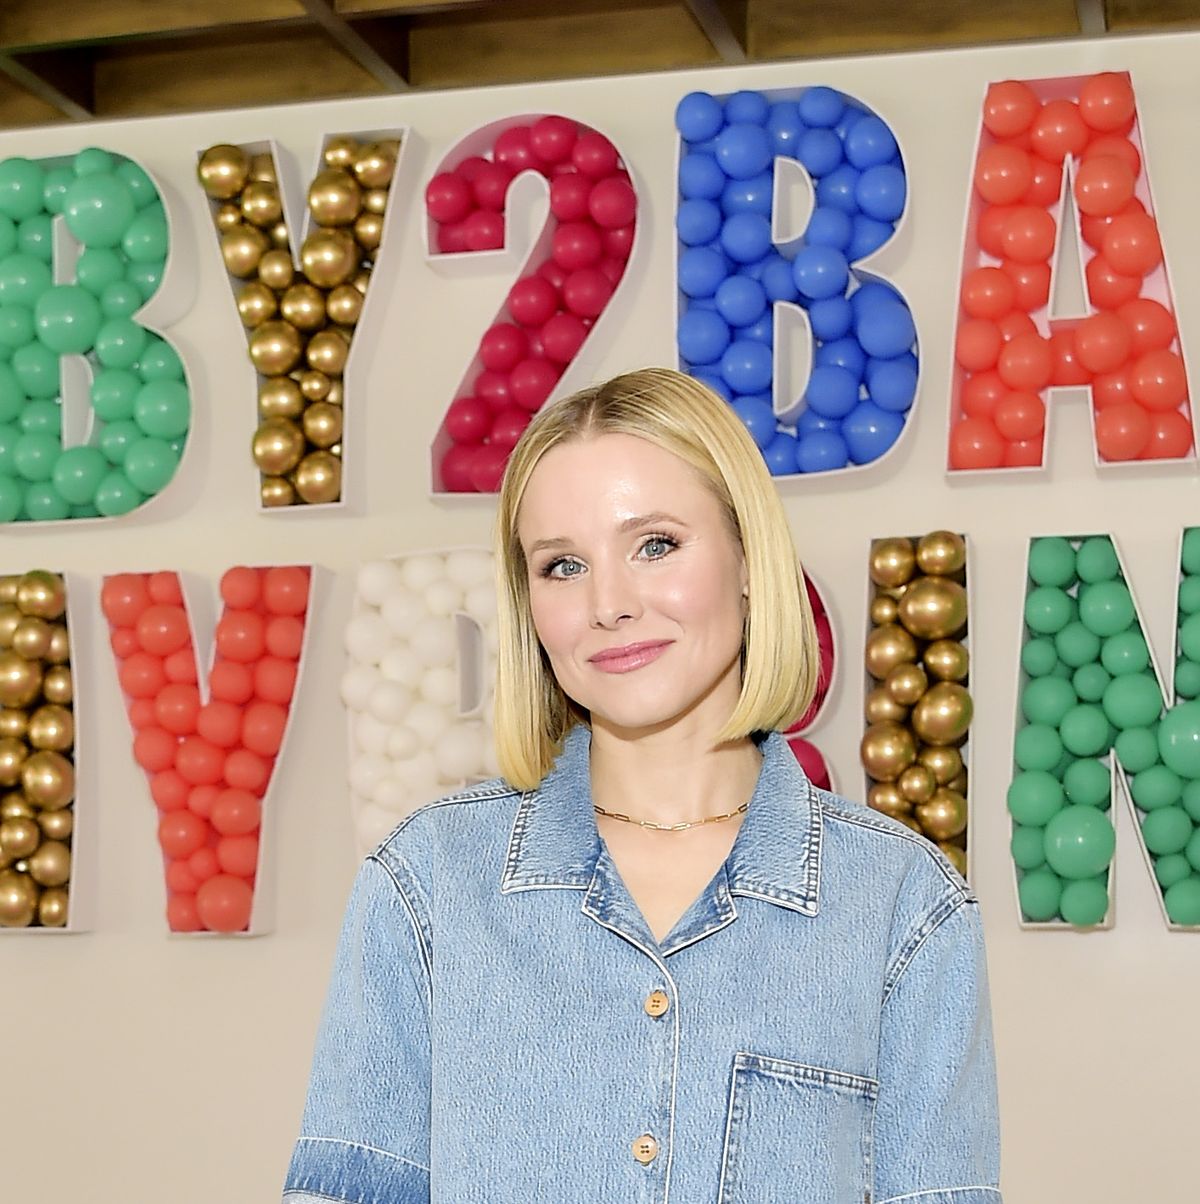 Kristen Bell got really real about breastfeeding and mastitis